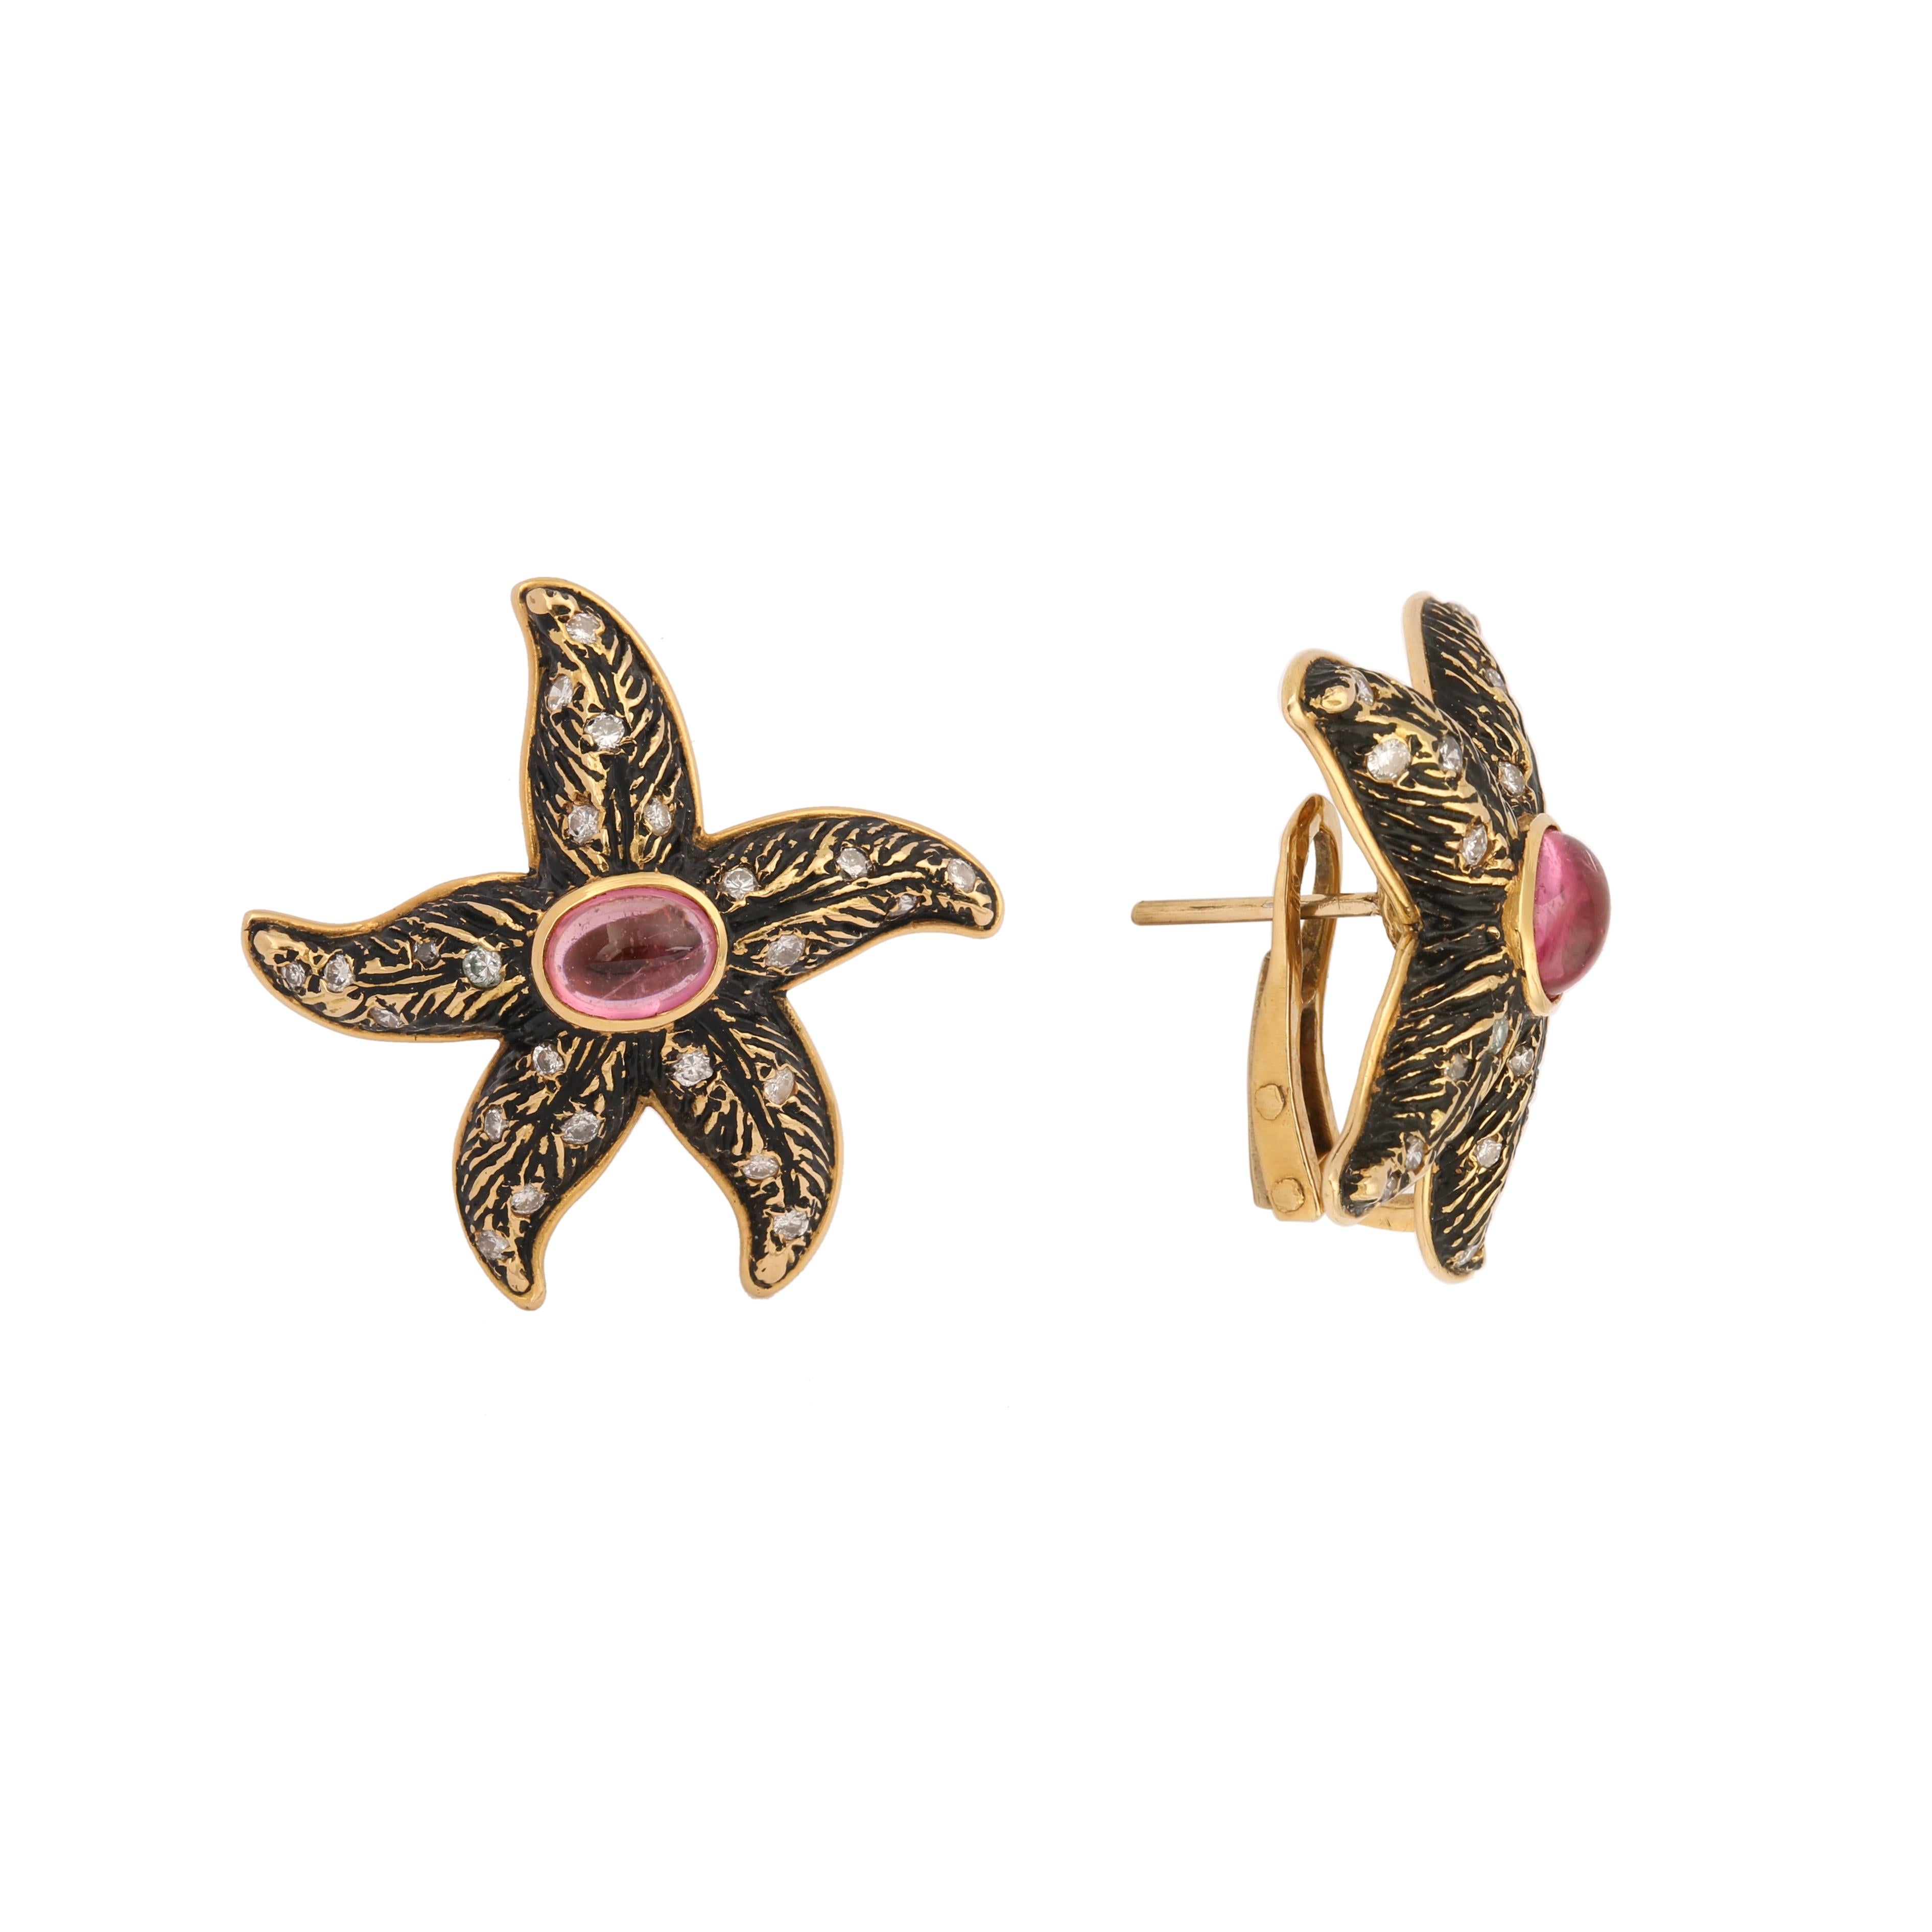 Pair of starfish earrings in black-enamelled yellow gold, centred on cabochon tourmalines and set with diamonds.

Clips for pierced ears.

Total estimated weight of tourmalines: 2 carats

Total estimated weight of diamonds: 0.35 carats

Dimensions :